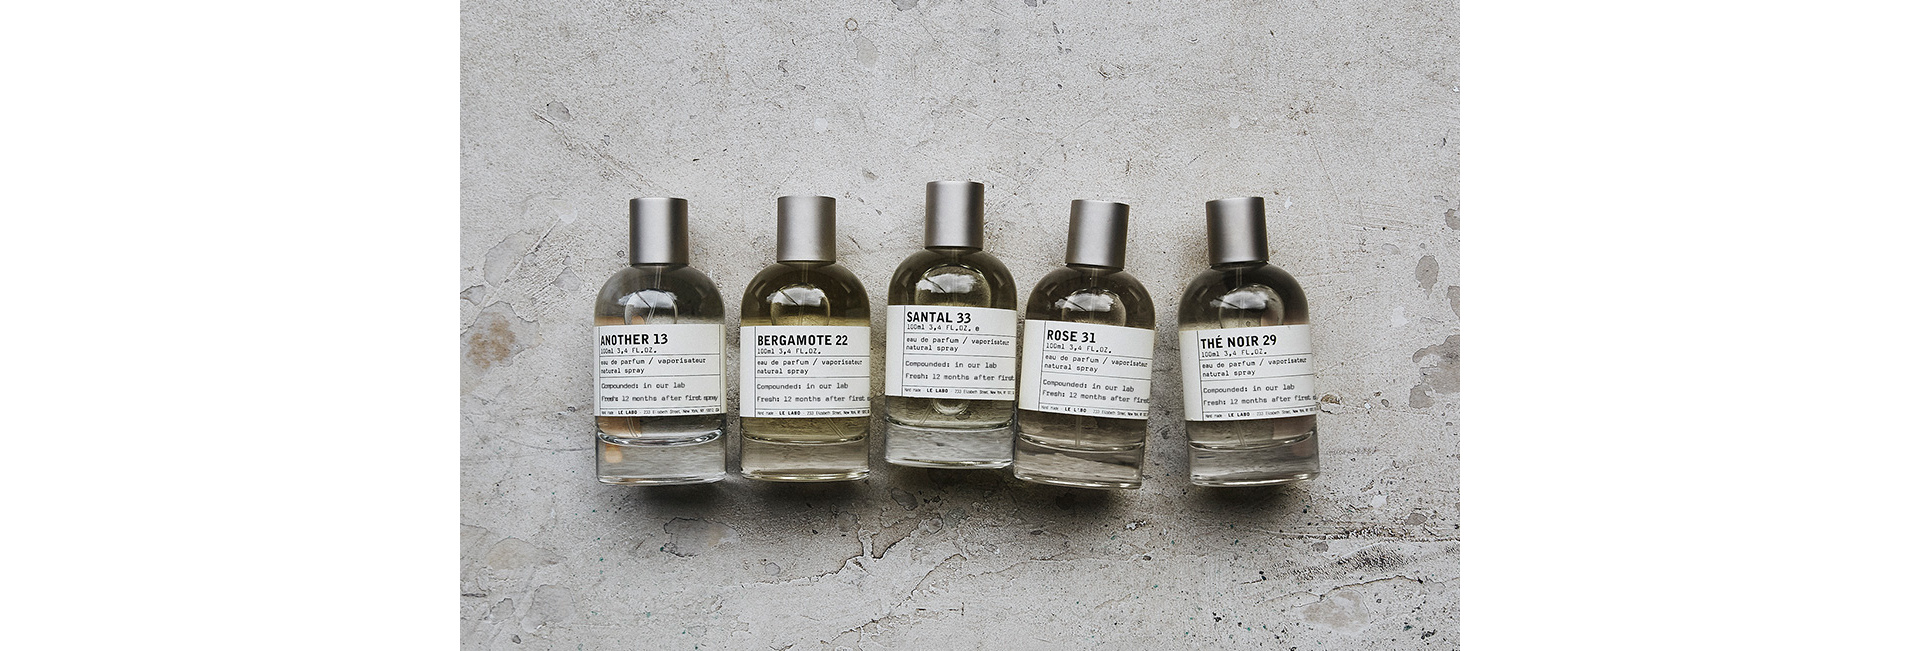 Unforgettable fragances from Le Labo